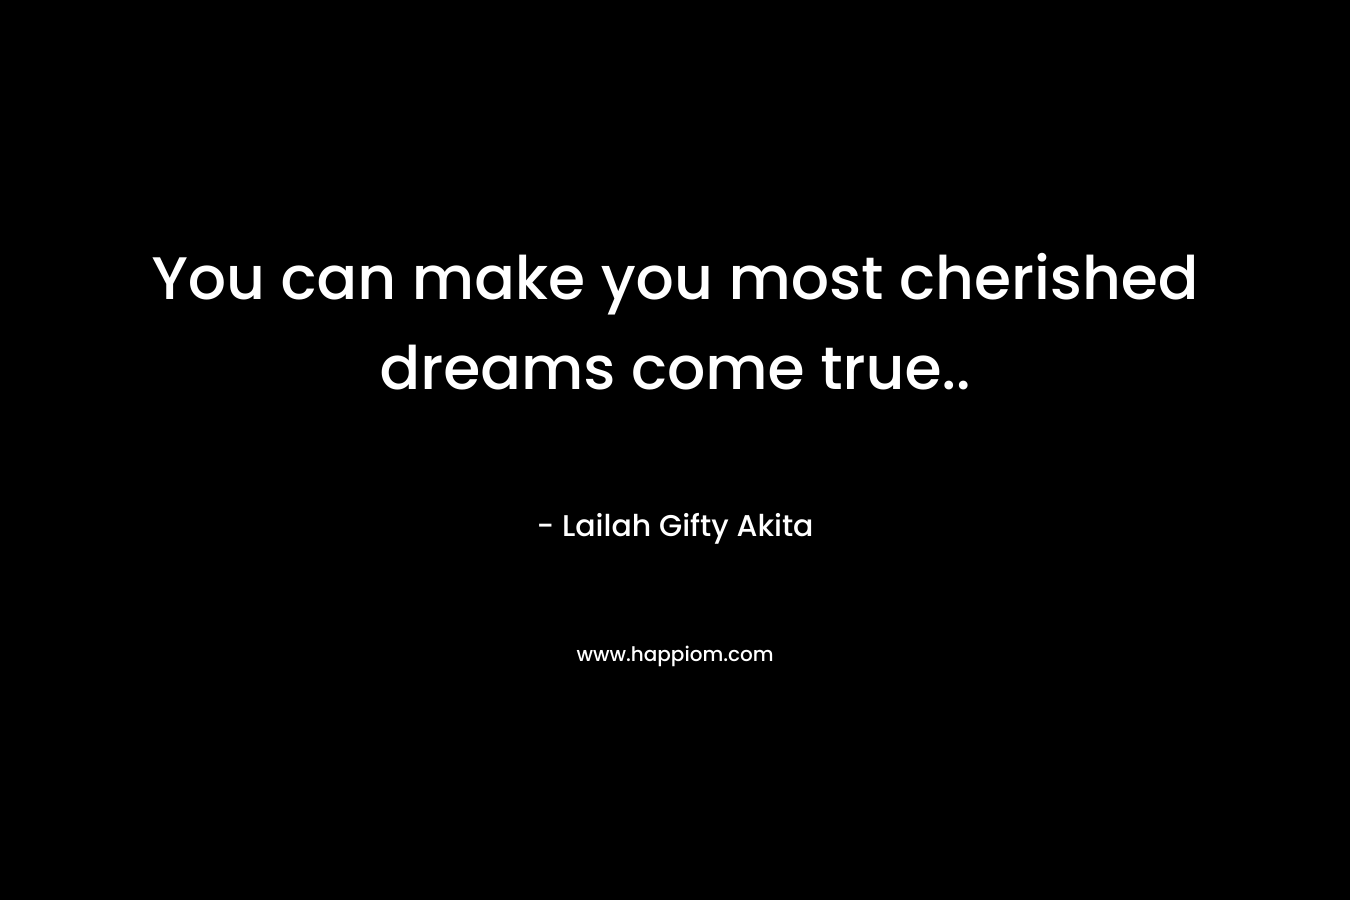 You can make you most cherished dreams come true..